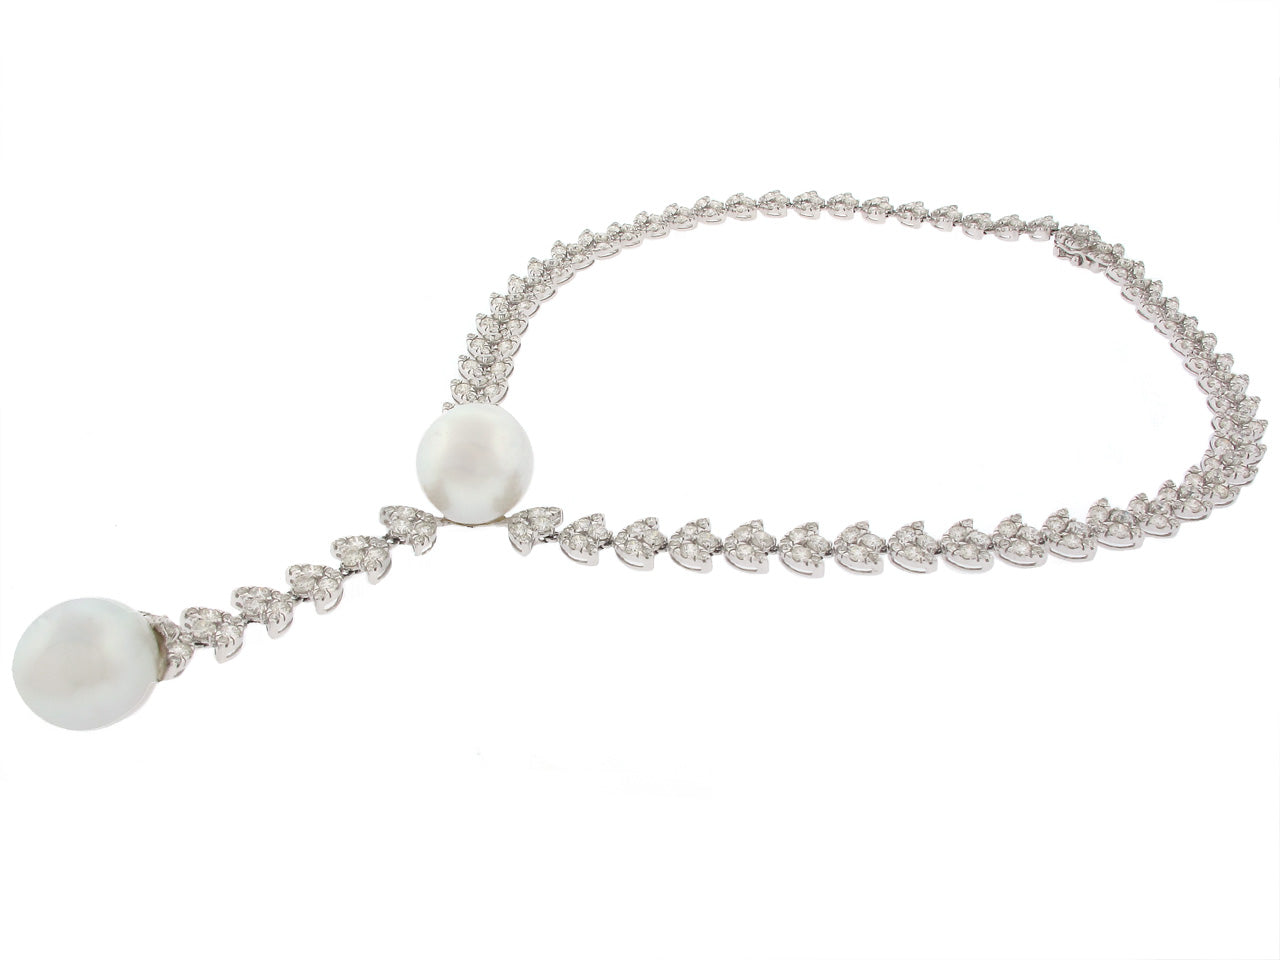 South Sea Pearl and Diamond Necklace in 18K White Gold